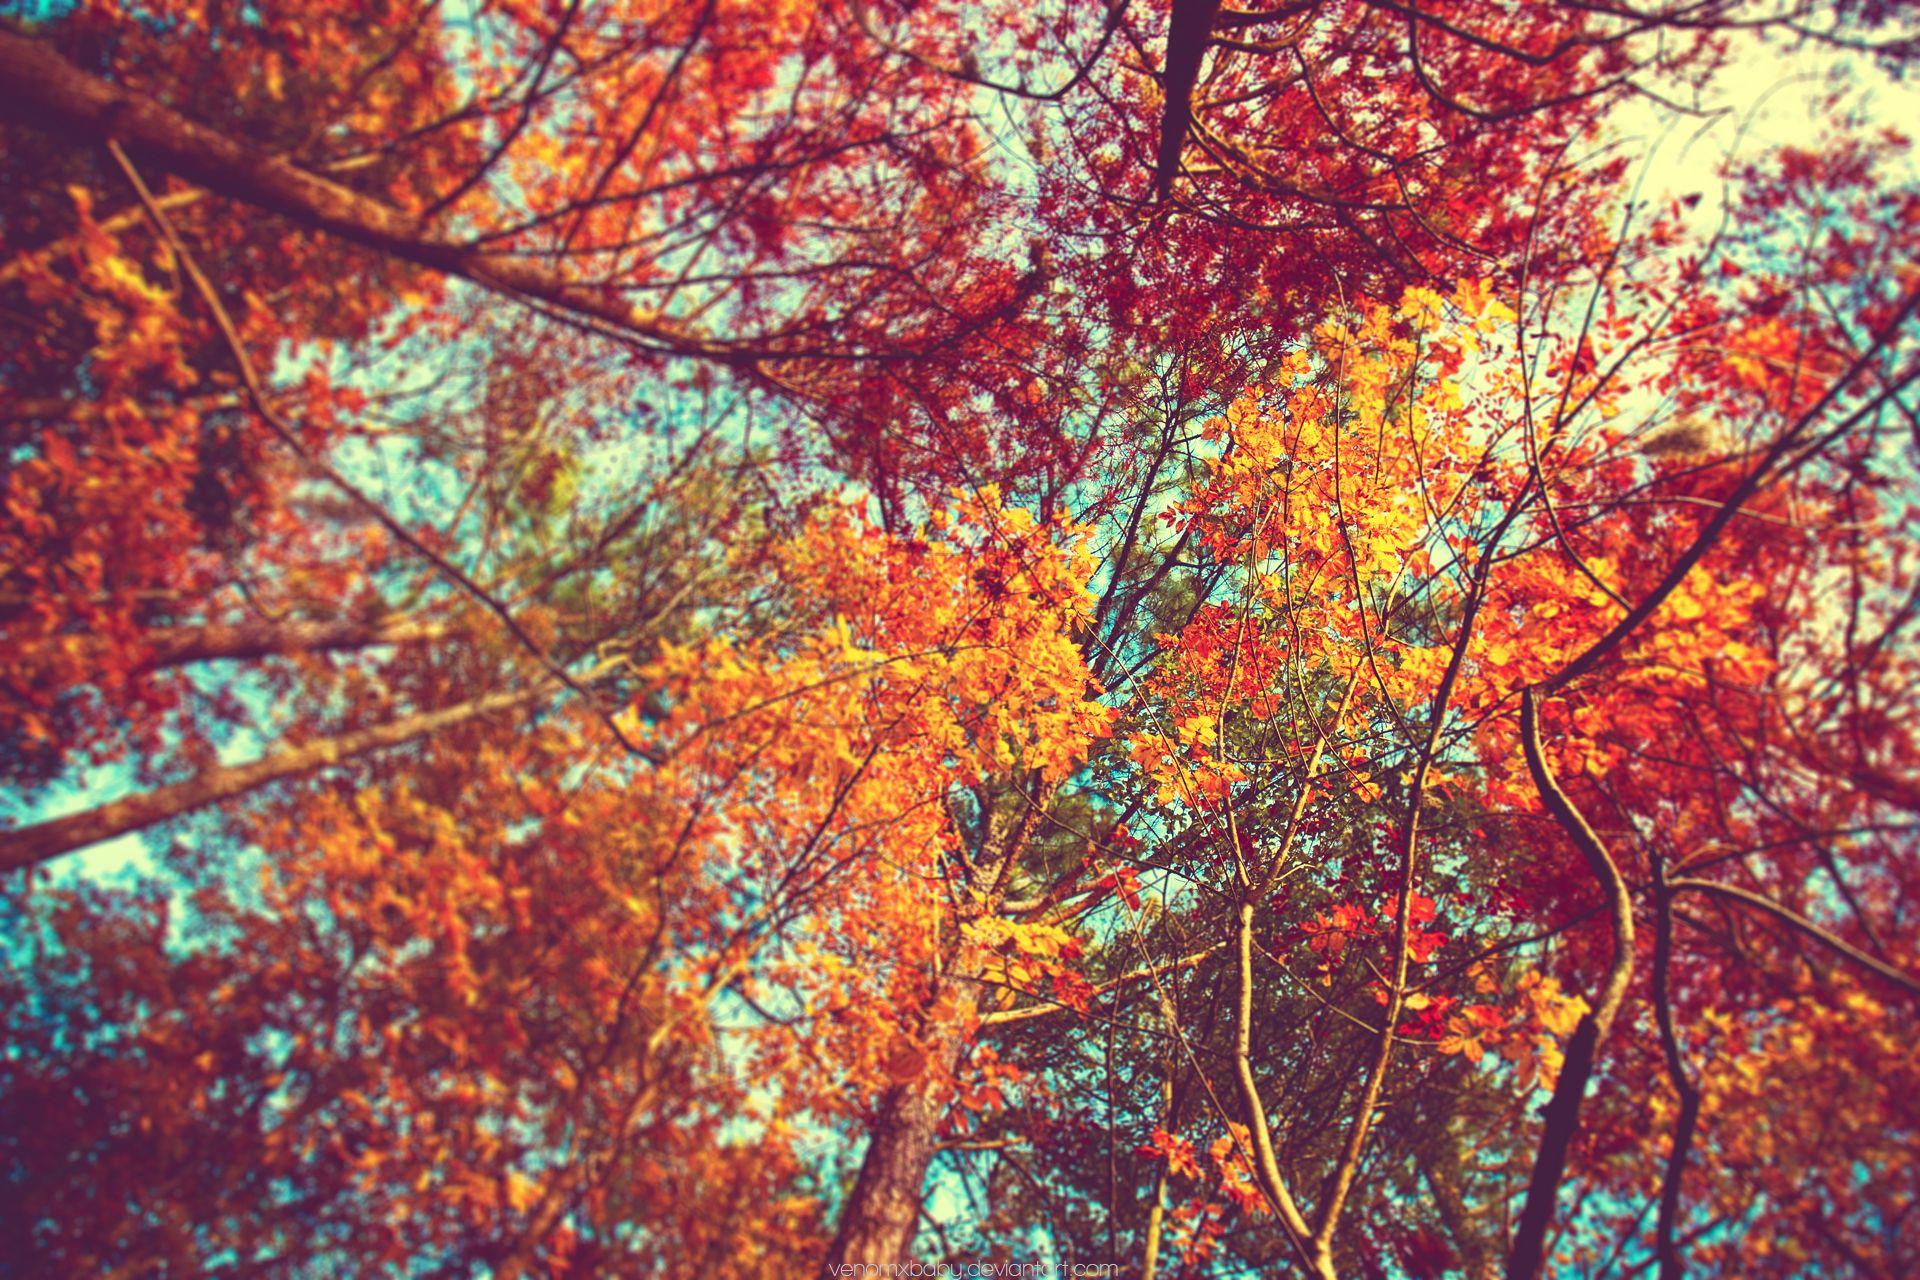 Autumn Tumblr Wallpaper 1080p with High Definition Wallpaper